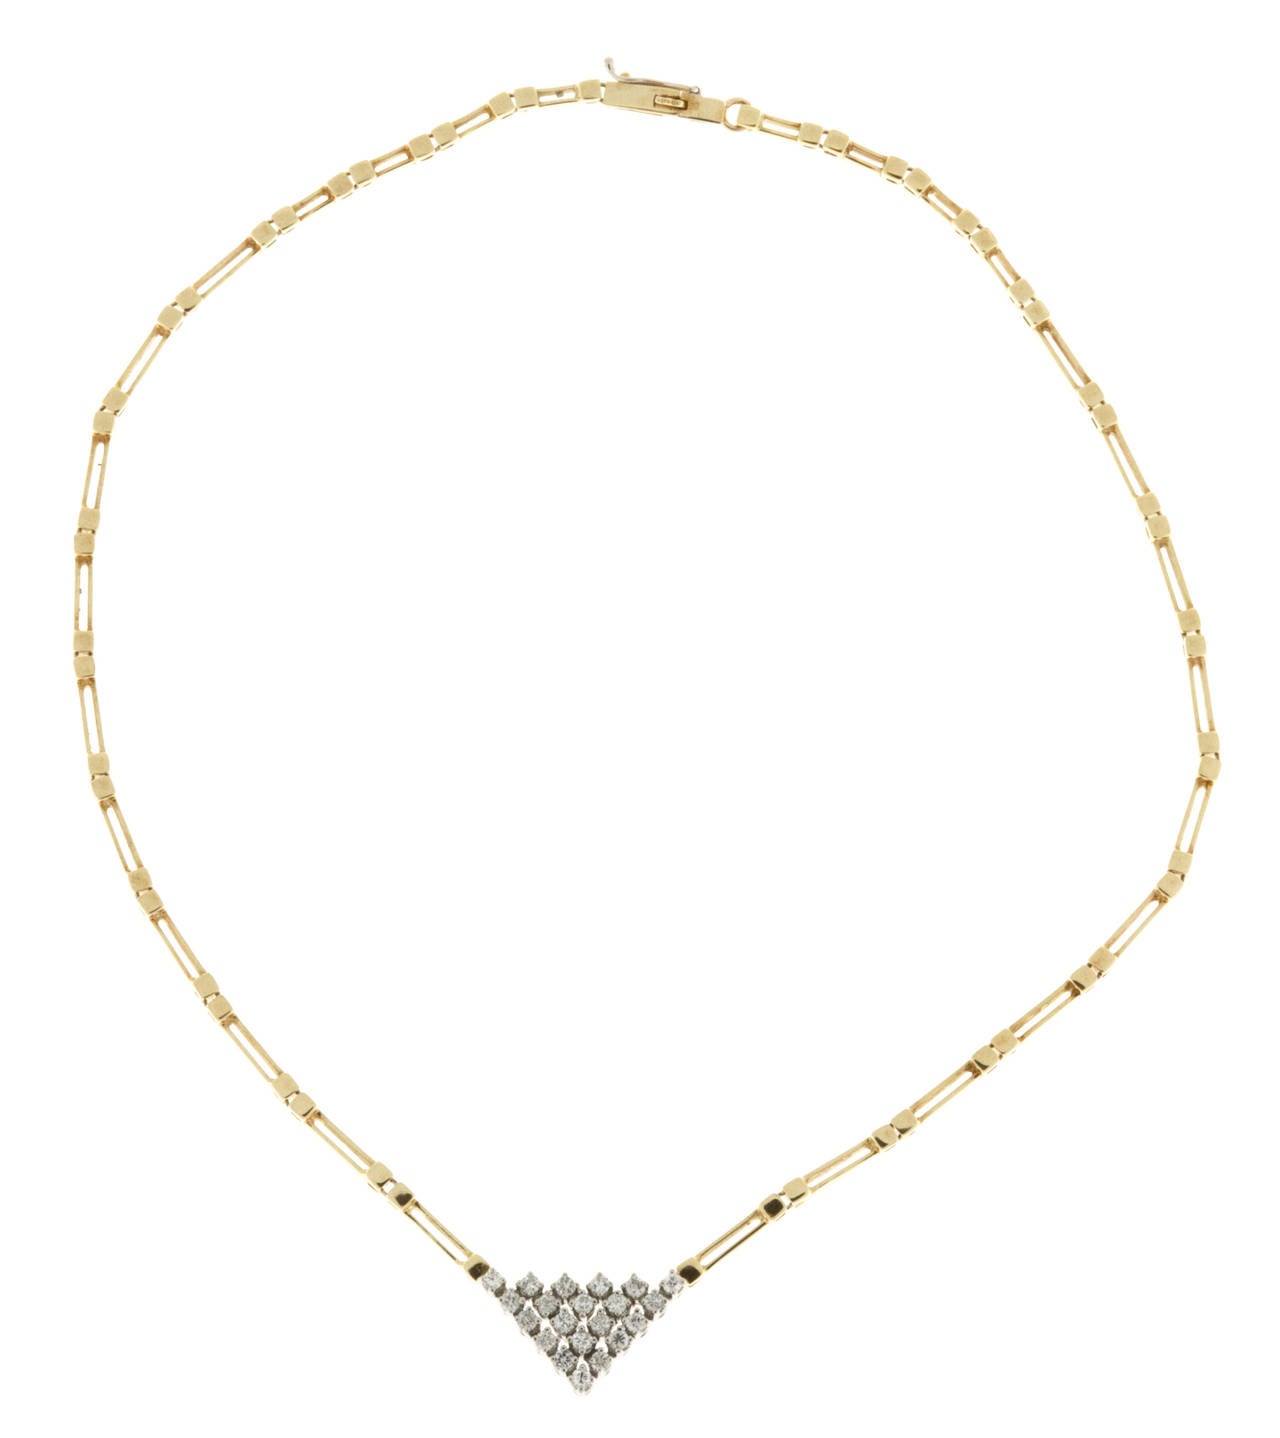 Beautifully hand assembled white & yellow gold necklace set with 21 round diamonds set into a triangular design with a 14k yellow gold handmade necklace.

21 round diamonds approx. total weight .65 cts G color, VS2- SI1 clarity.
14k Yellow